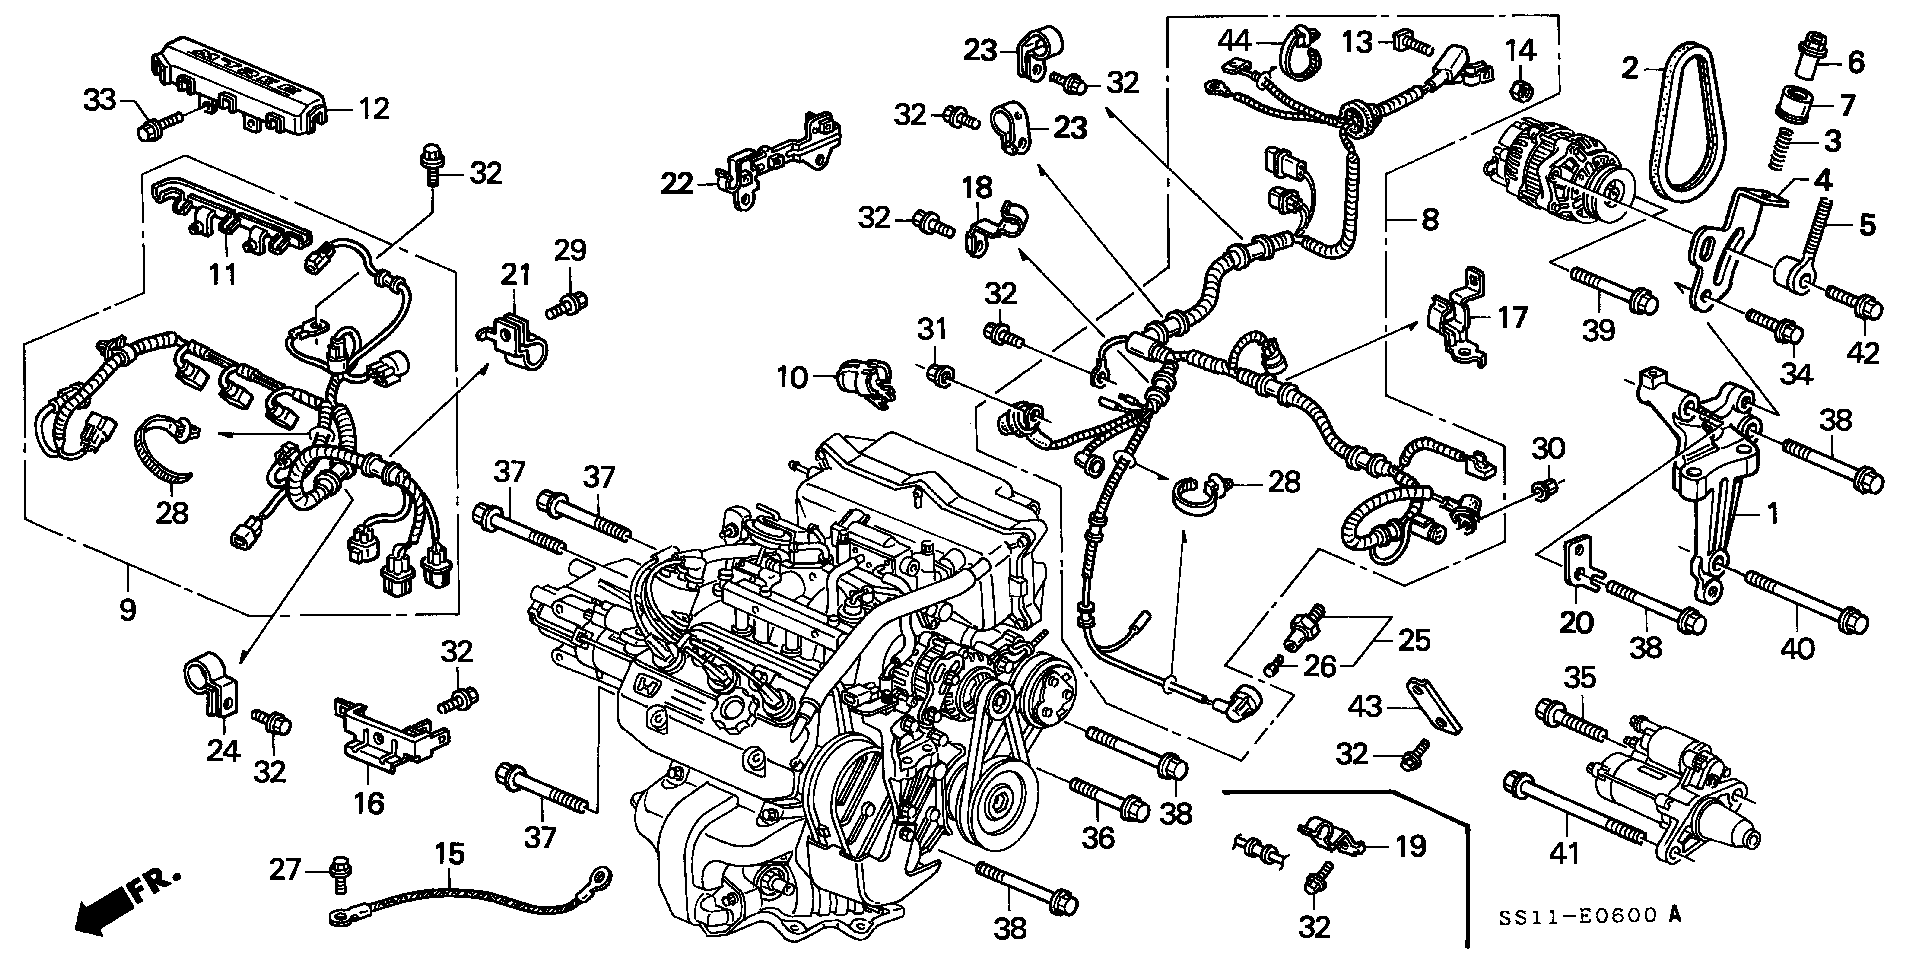 ENGINE WIRE HARNESS/ CLAMP